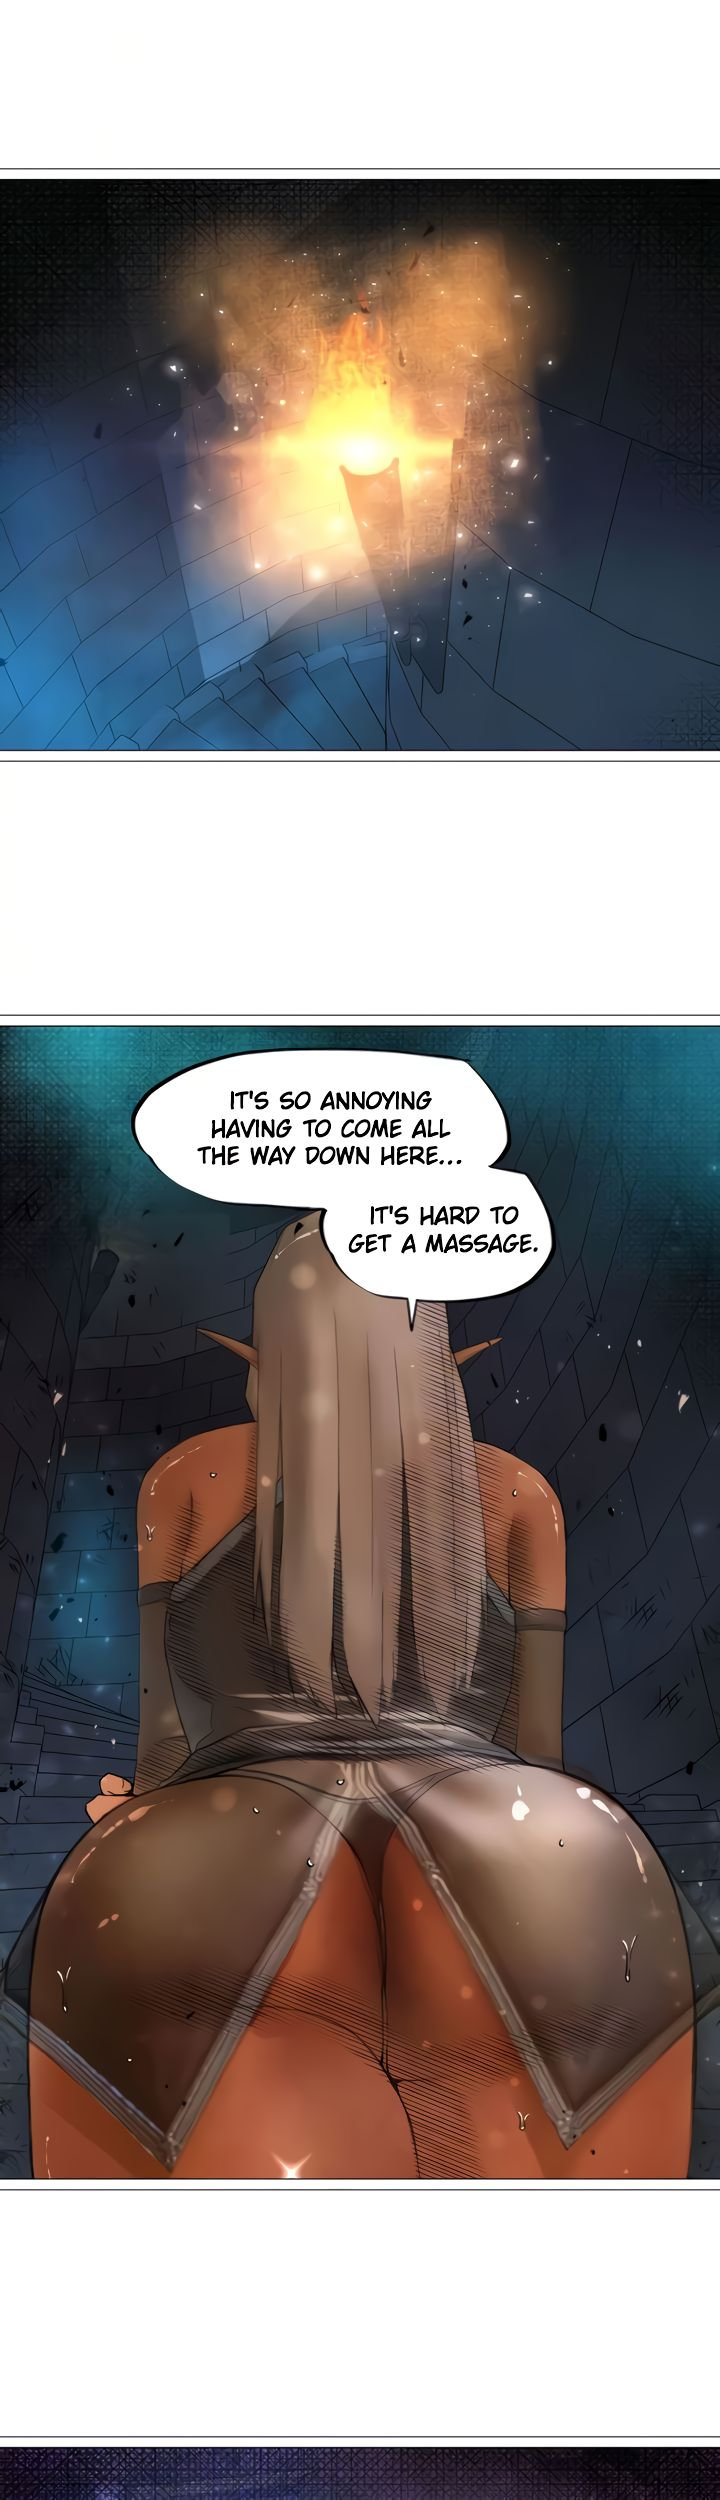 The DARK ELF QUEEN and the SLAVE ORC Chapter 28 - HolyManga.net